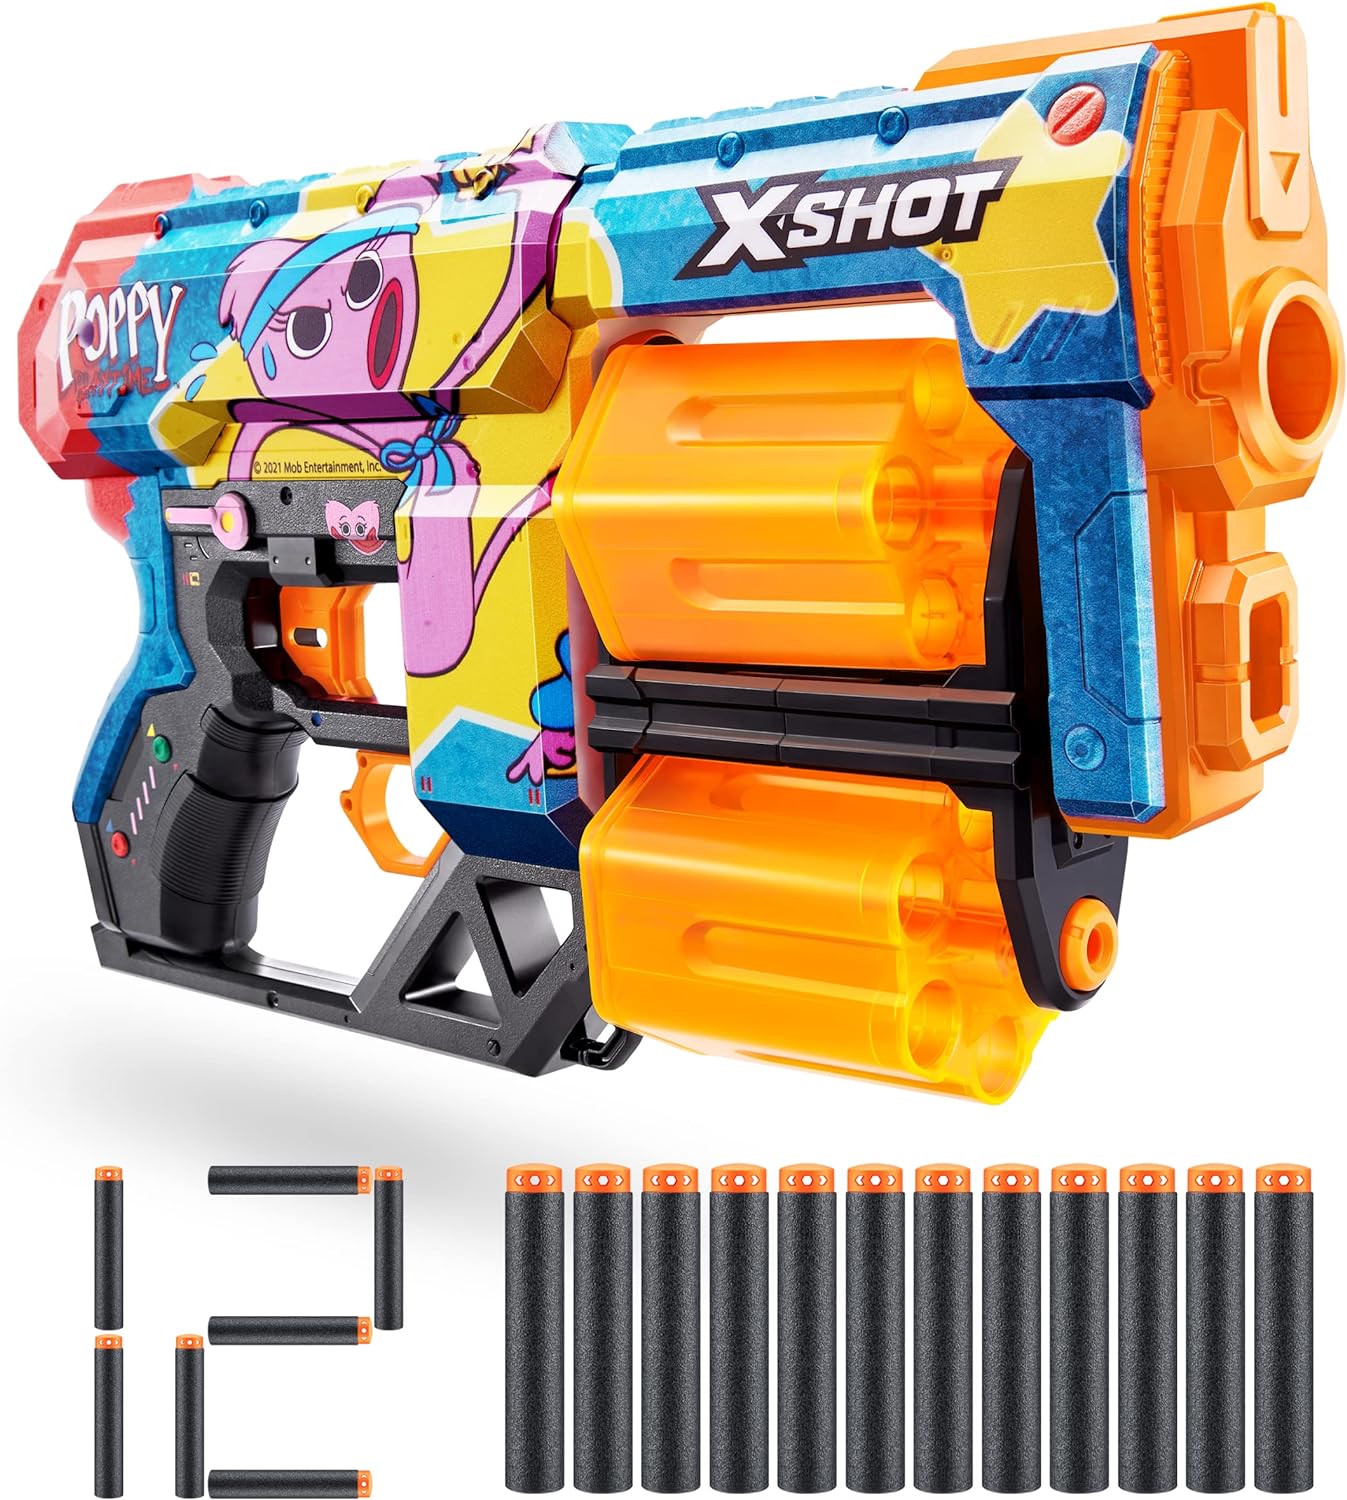 X-Shot Skins Dread Blaster - Poppy Playtime (Kissy) by ZURU with 12 Darts, Rotating Double Barrel, Air Pocket Dart Technology, Toy Foam Blaster for Kids, Teens and Adults